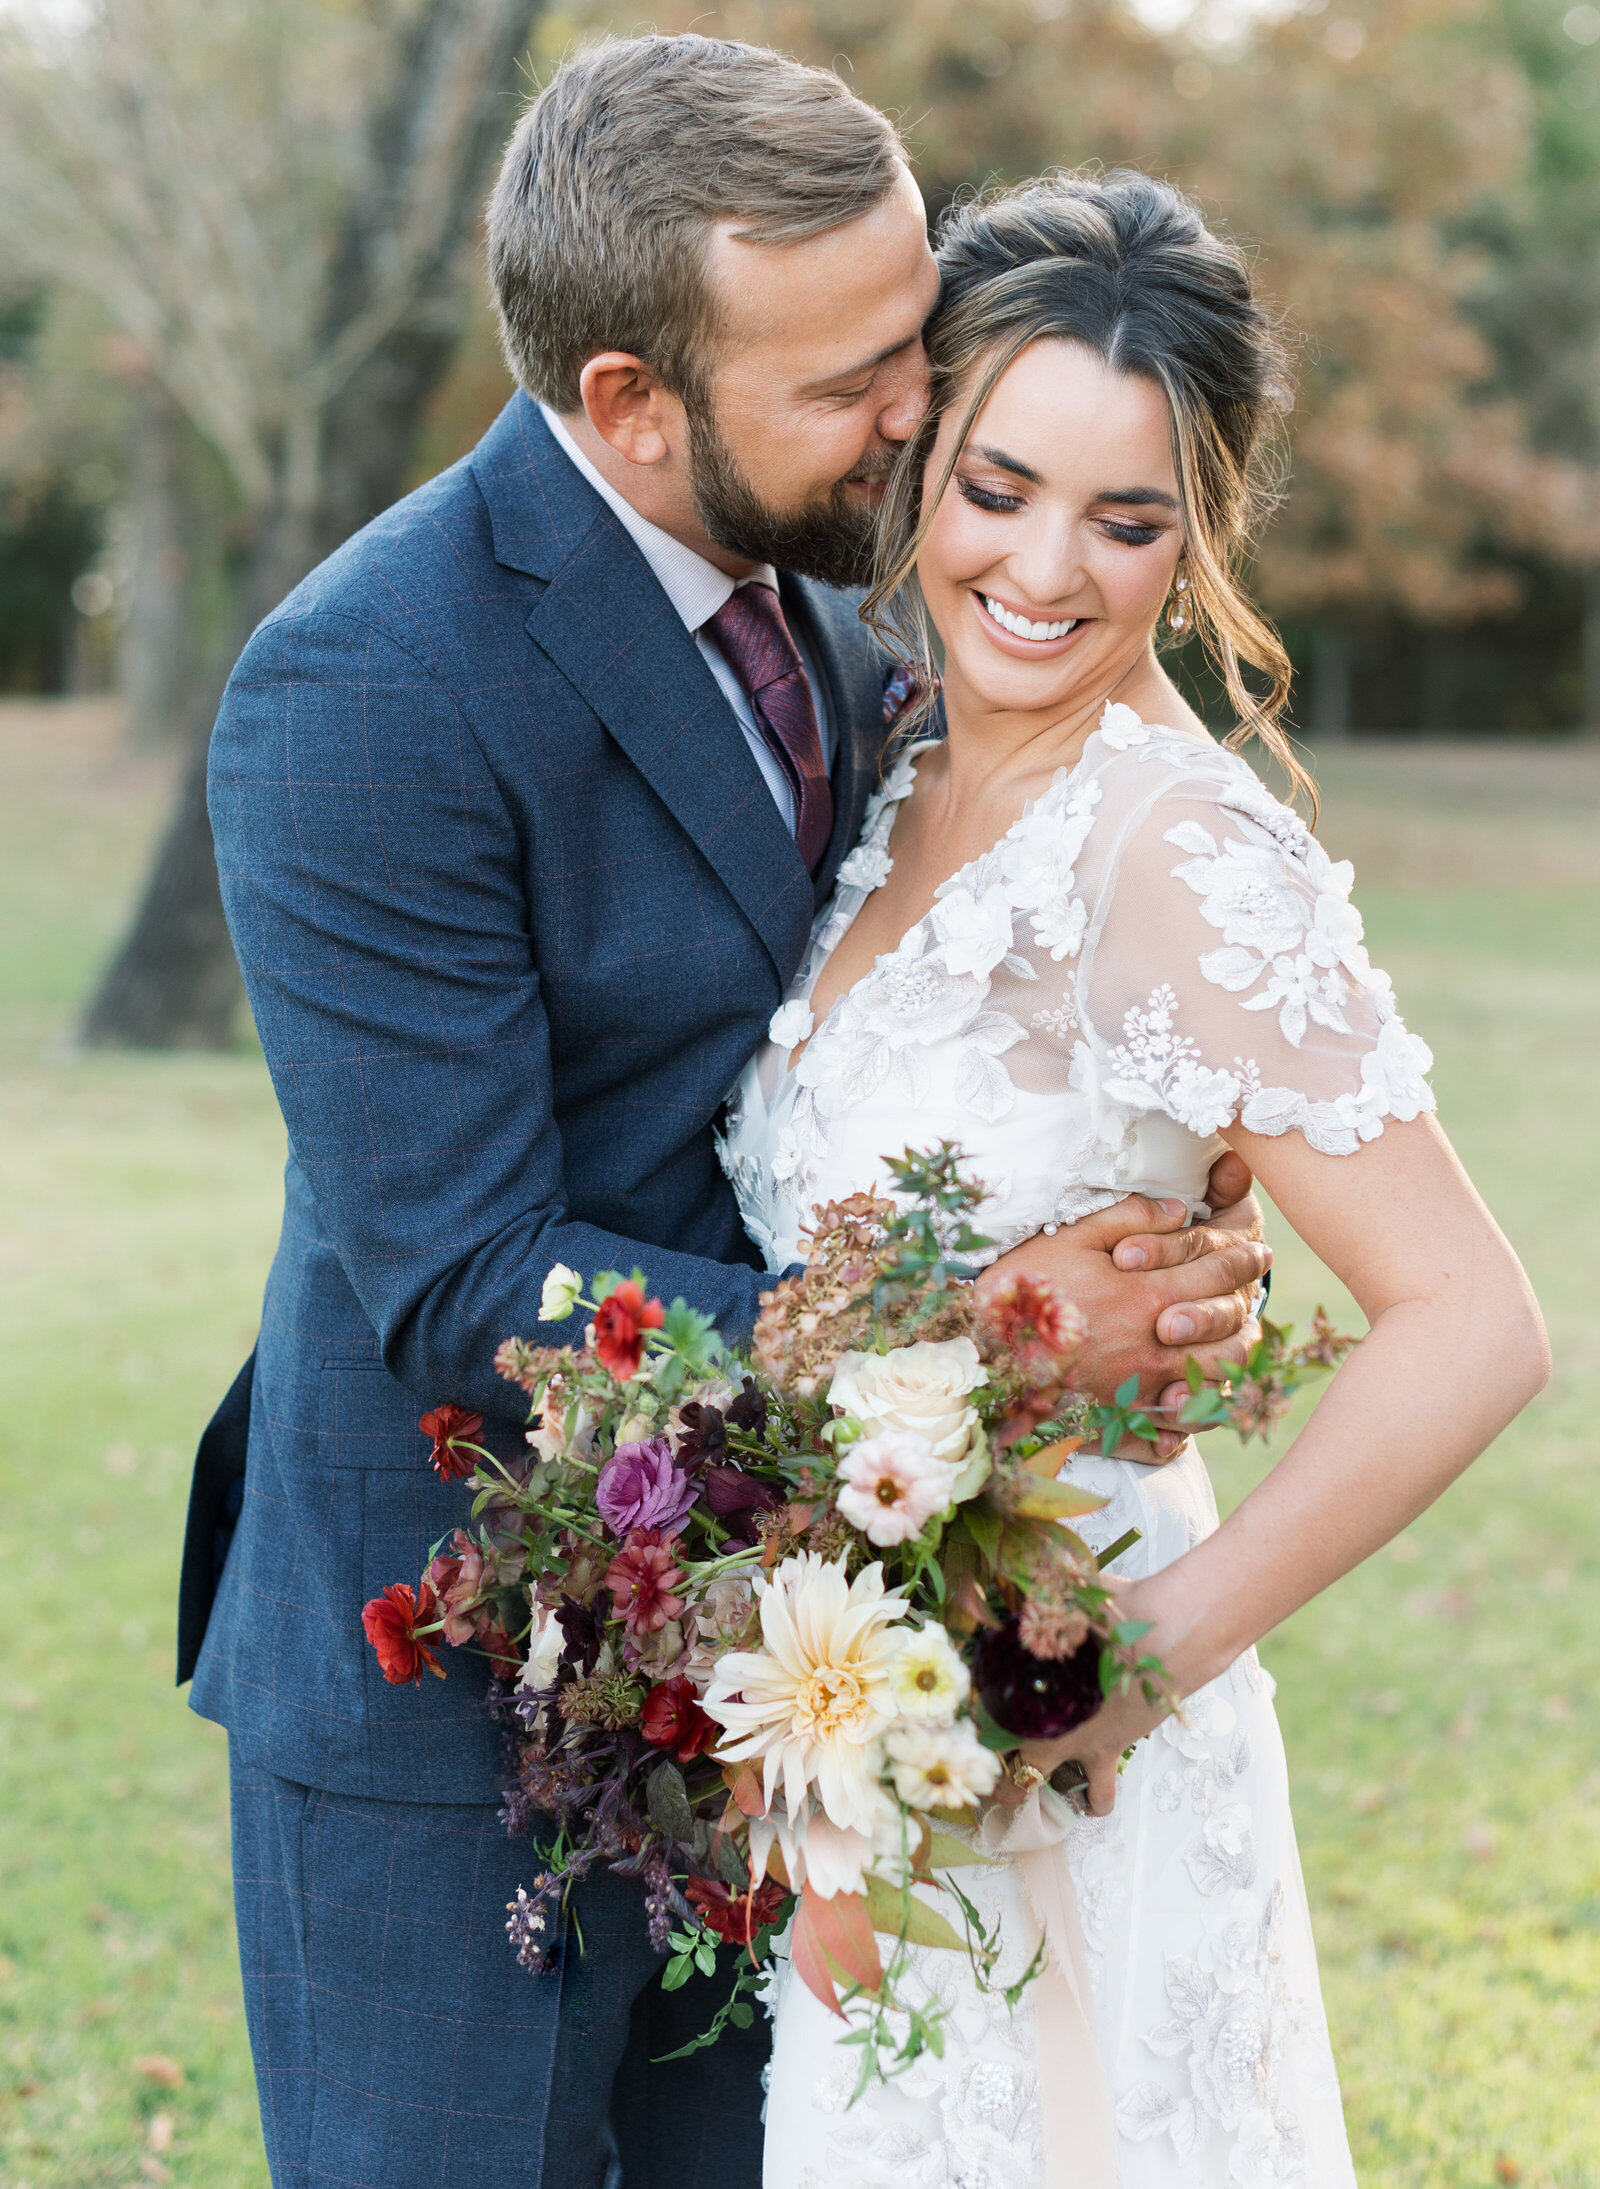 Portrait of a bride and groom in a white lace wedding gown and blue suit holding a bouquet outdoors atop the grass